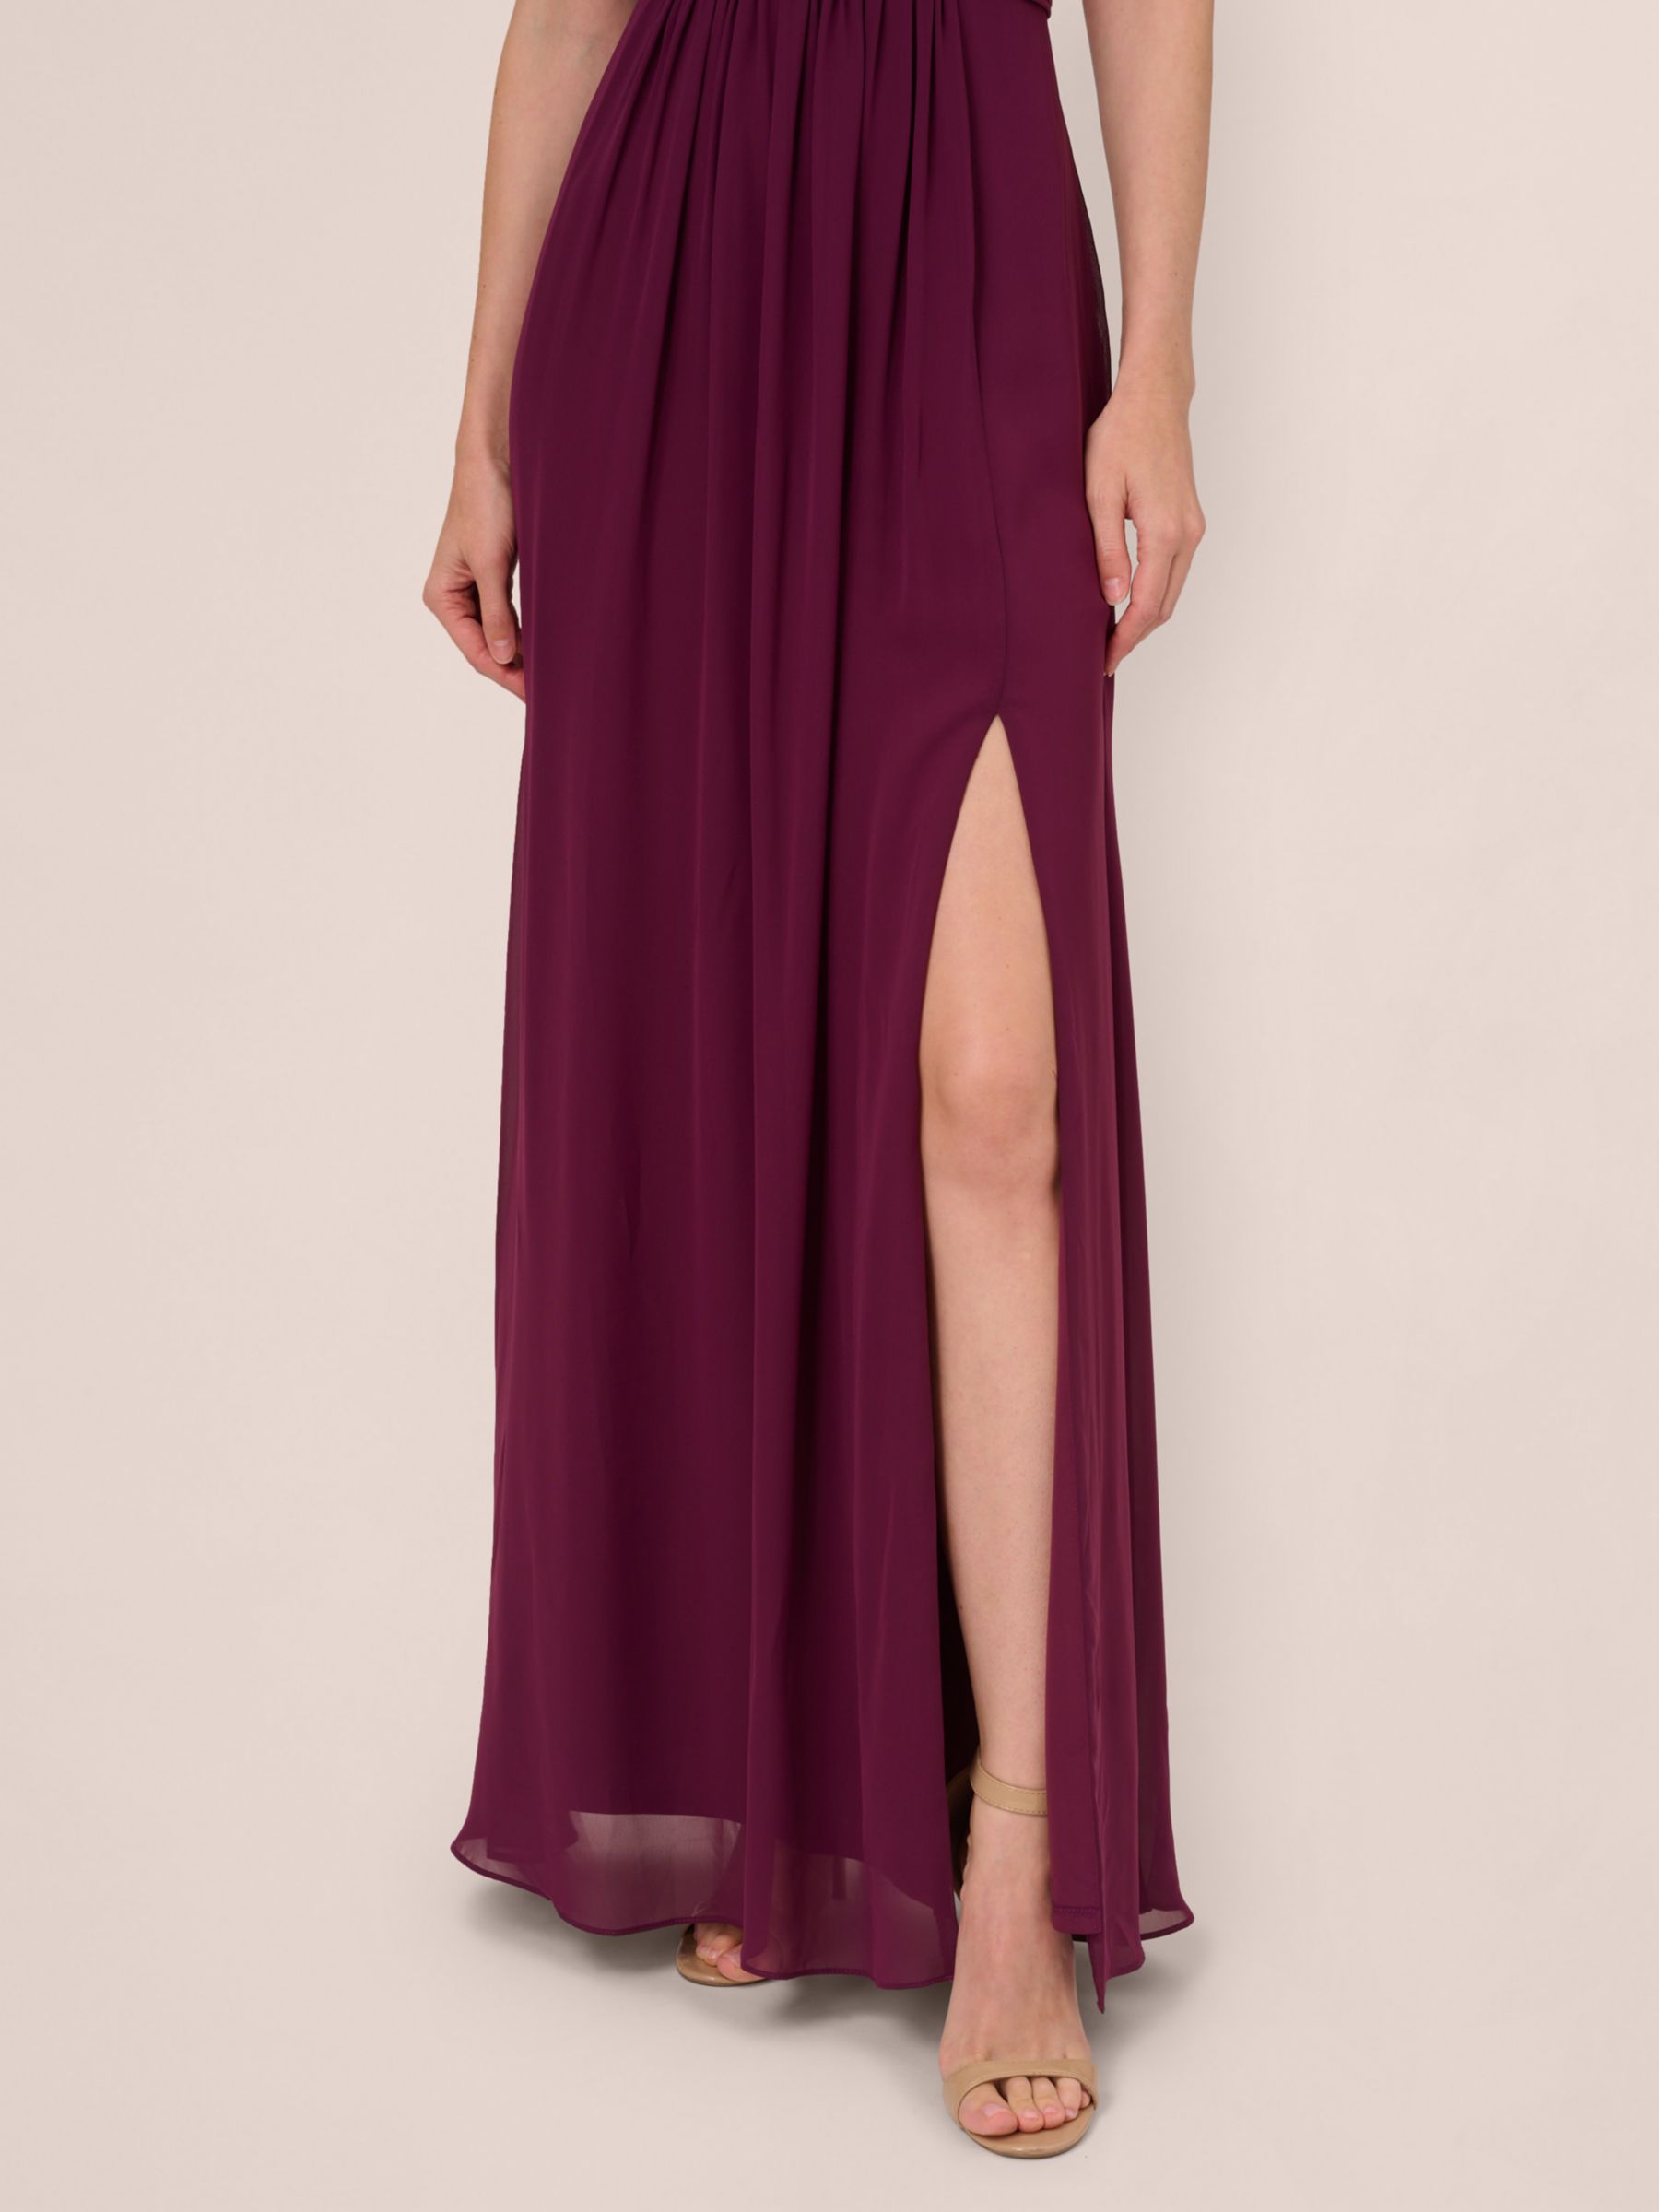 Buy Adrianna Papell One Shoulder Crepe Chiffon Maxi Dress, Cassis Online at johnlewis.com